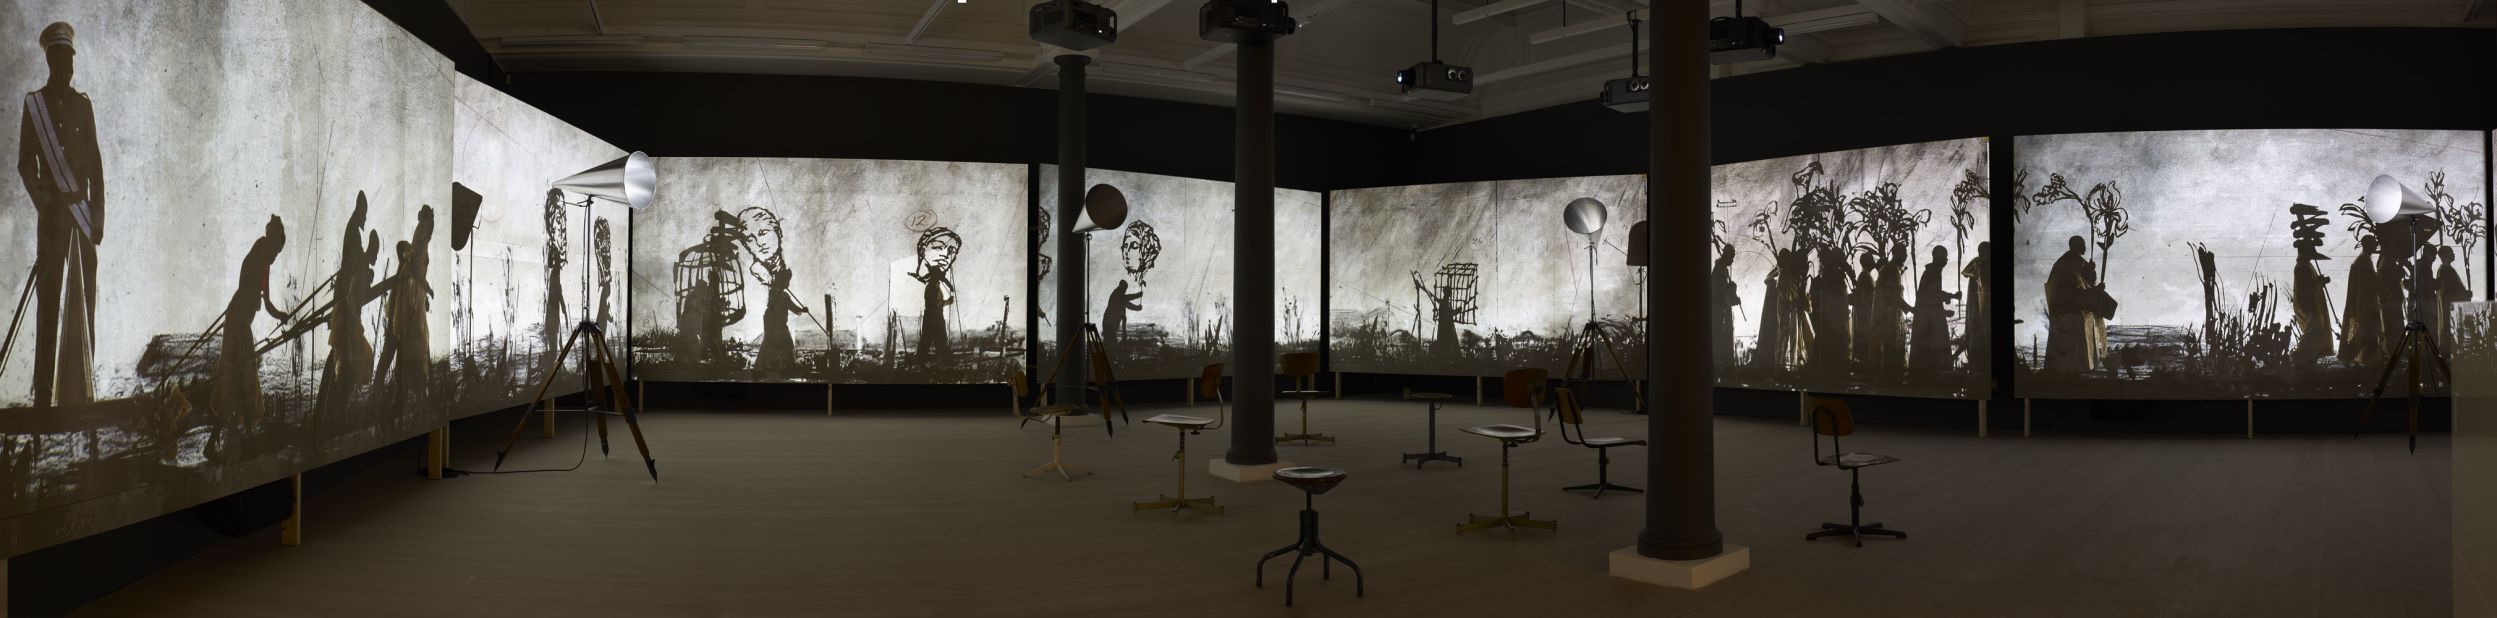 The film titled <a href="http://mariangoodman.com/exhibition/2252/installation-views" target="_blank" target="_blank"><em>More Sweetly Play the Dance</em></a> is projected across eight screens, spanning 45 meters. Kentridge says he has been interested in imagery of marches and "dances of death" for years. 